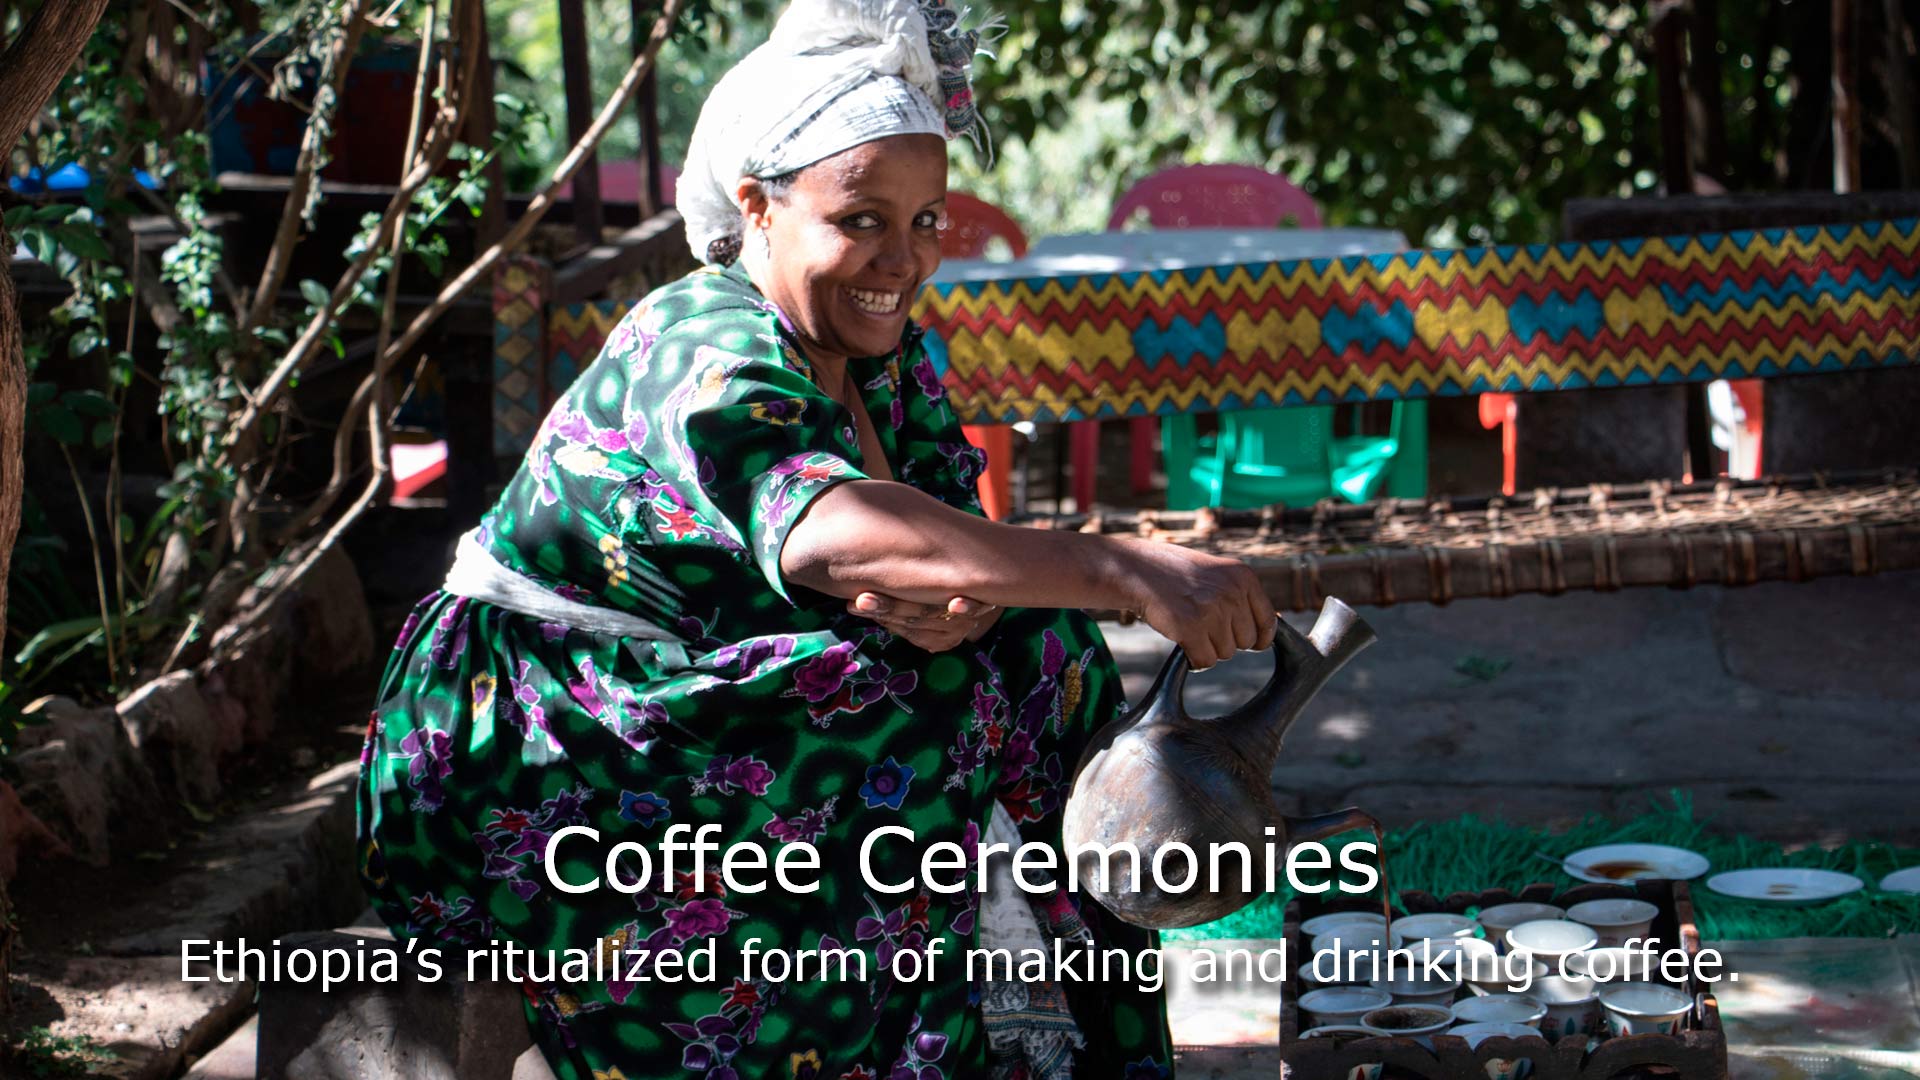 coffee ceremony - Ethiopia's ritualized form of making and drinking coffee